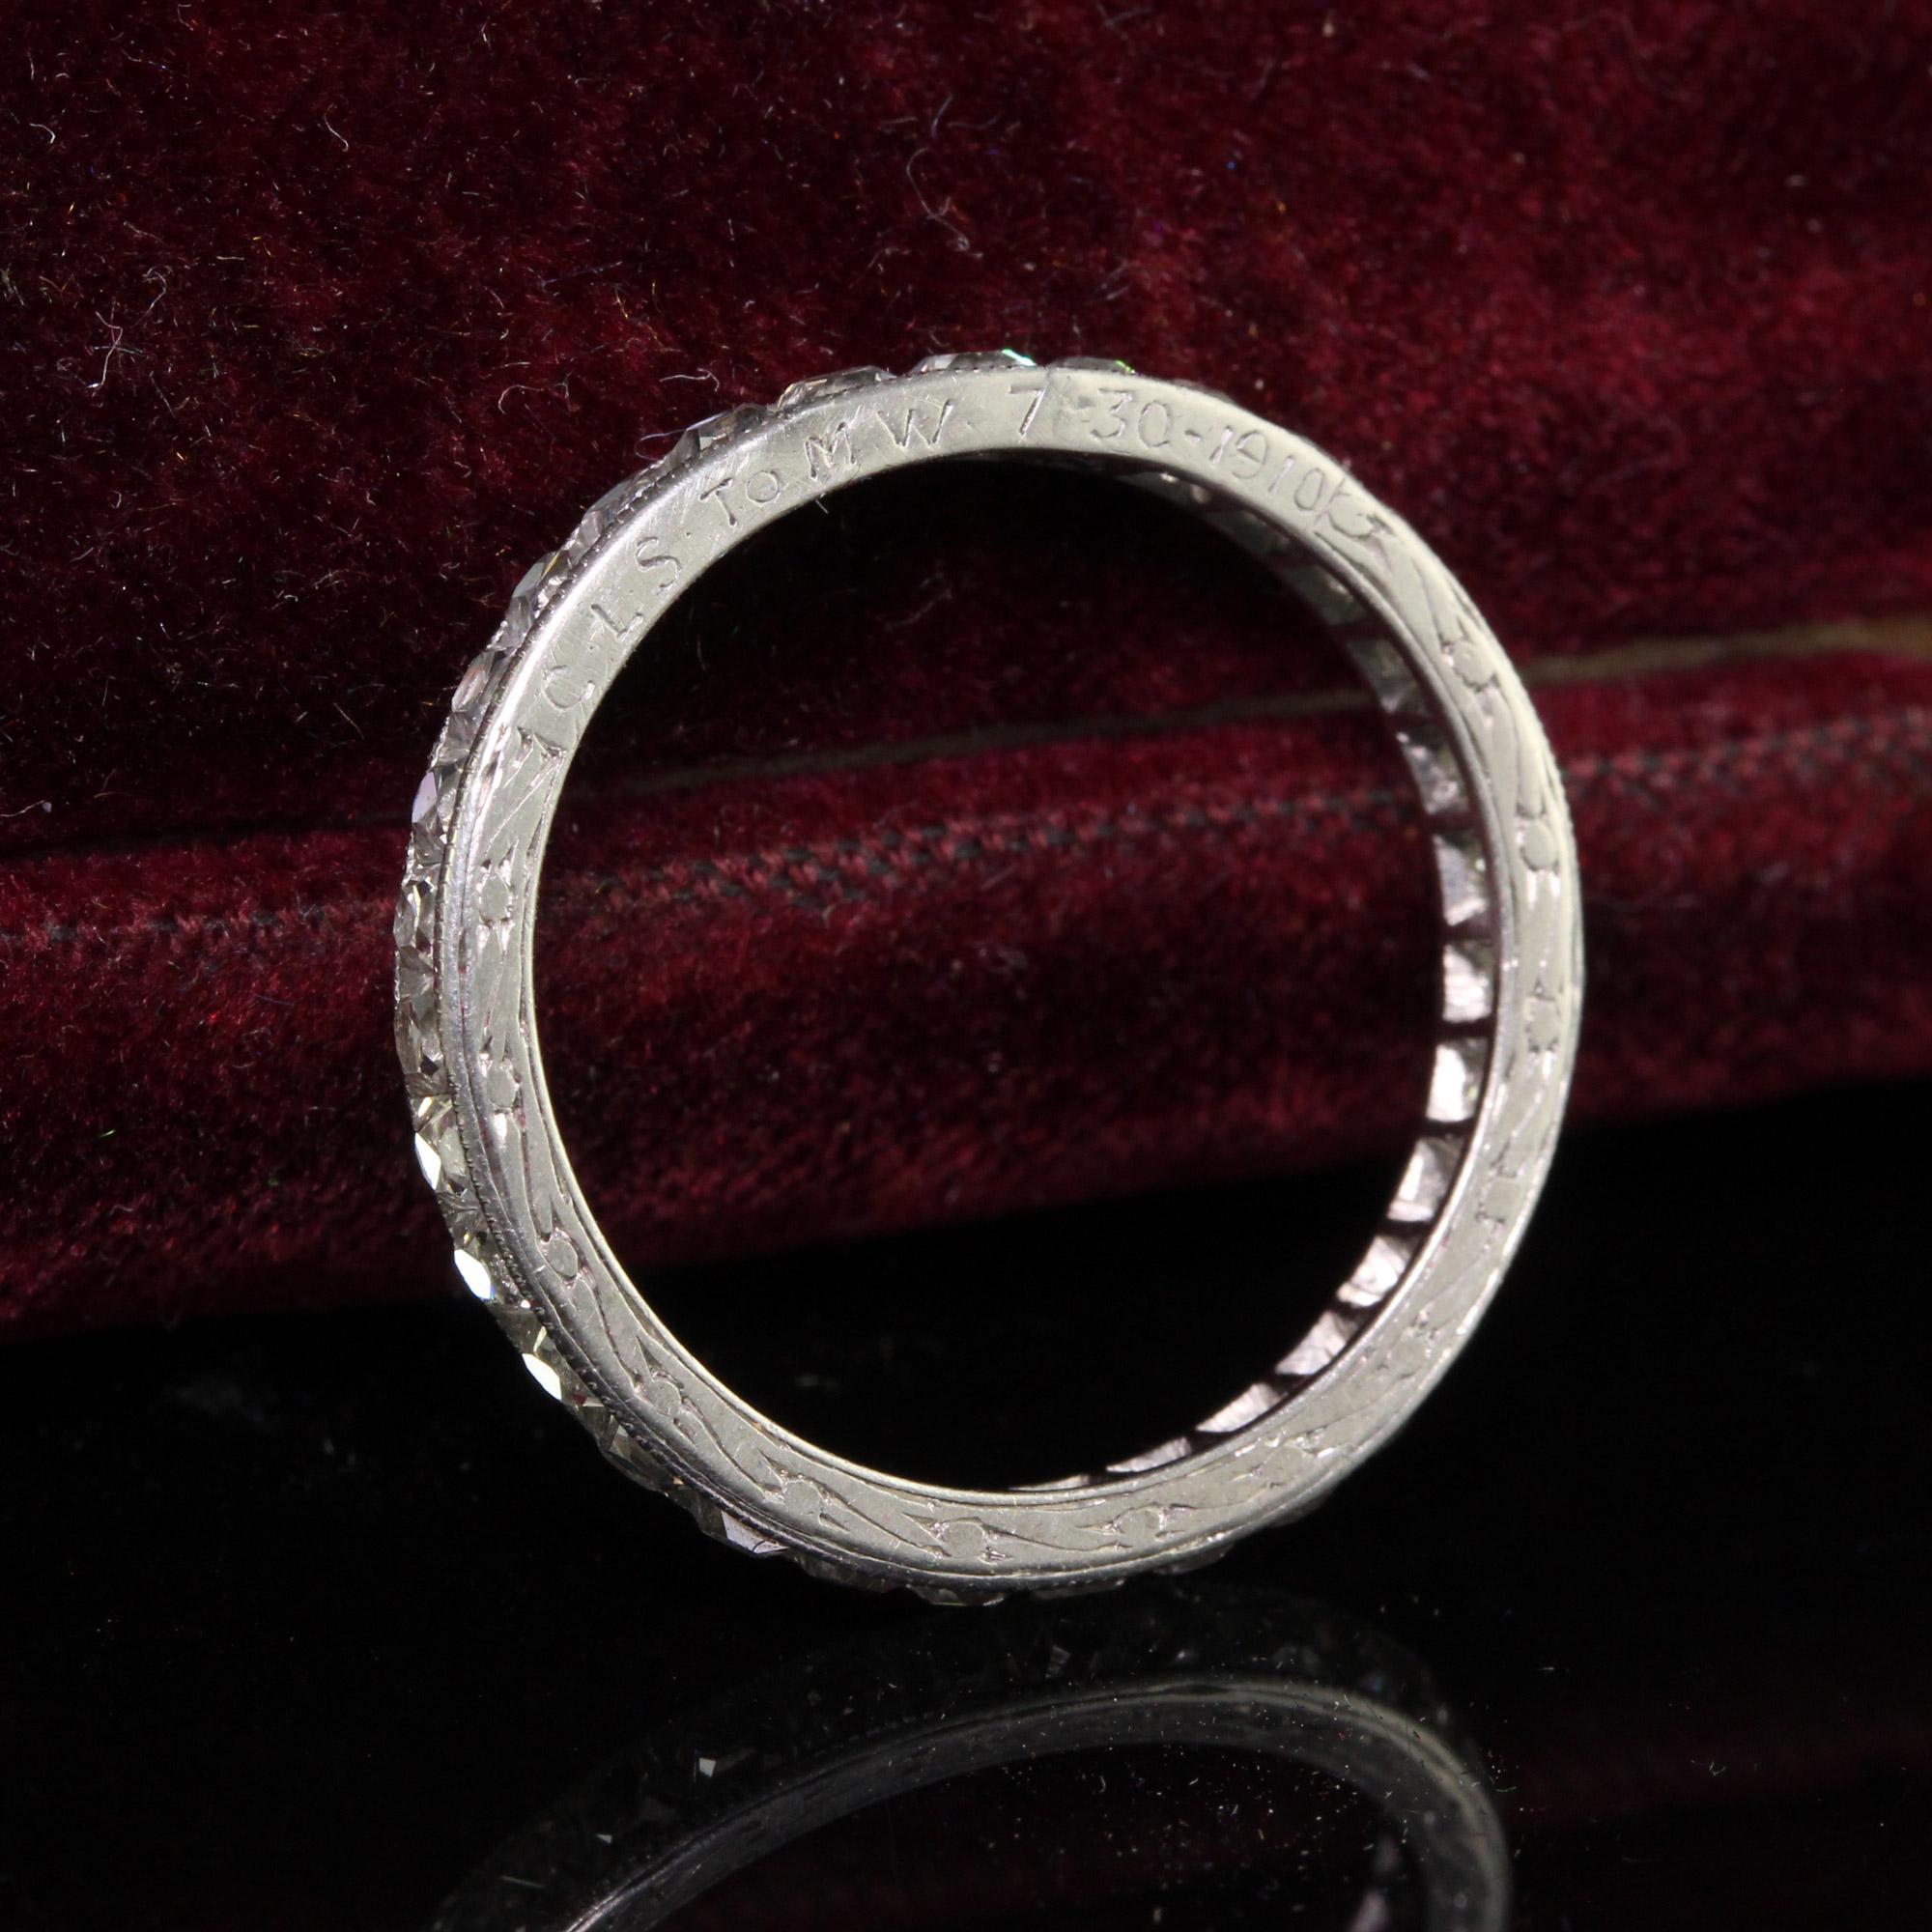 Antique Edwardian Platinum French Cut Diamond Engraved Eternity Ring - Size 7 For Sale 1